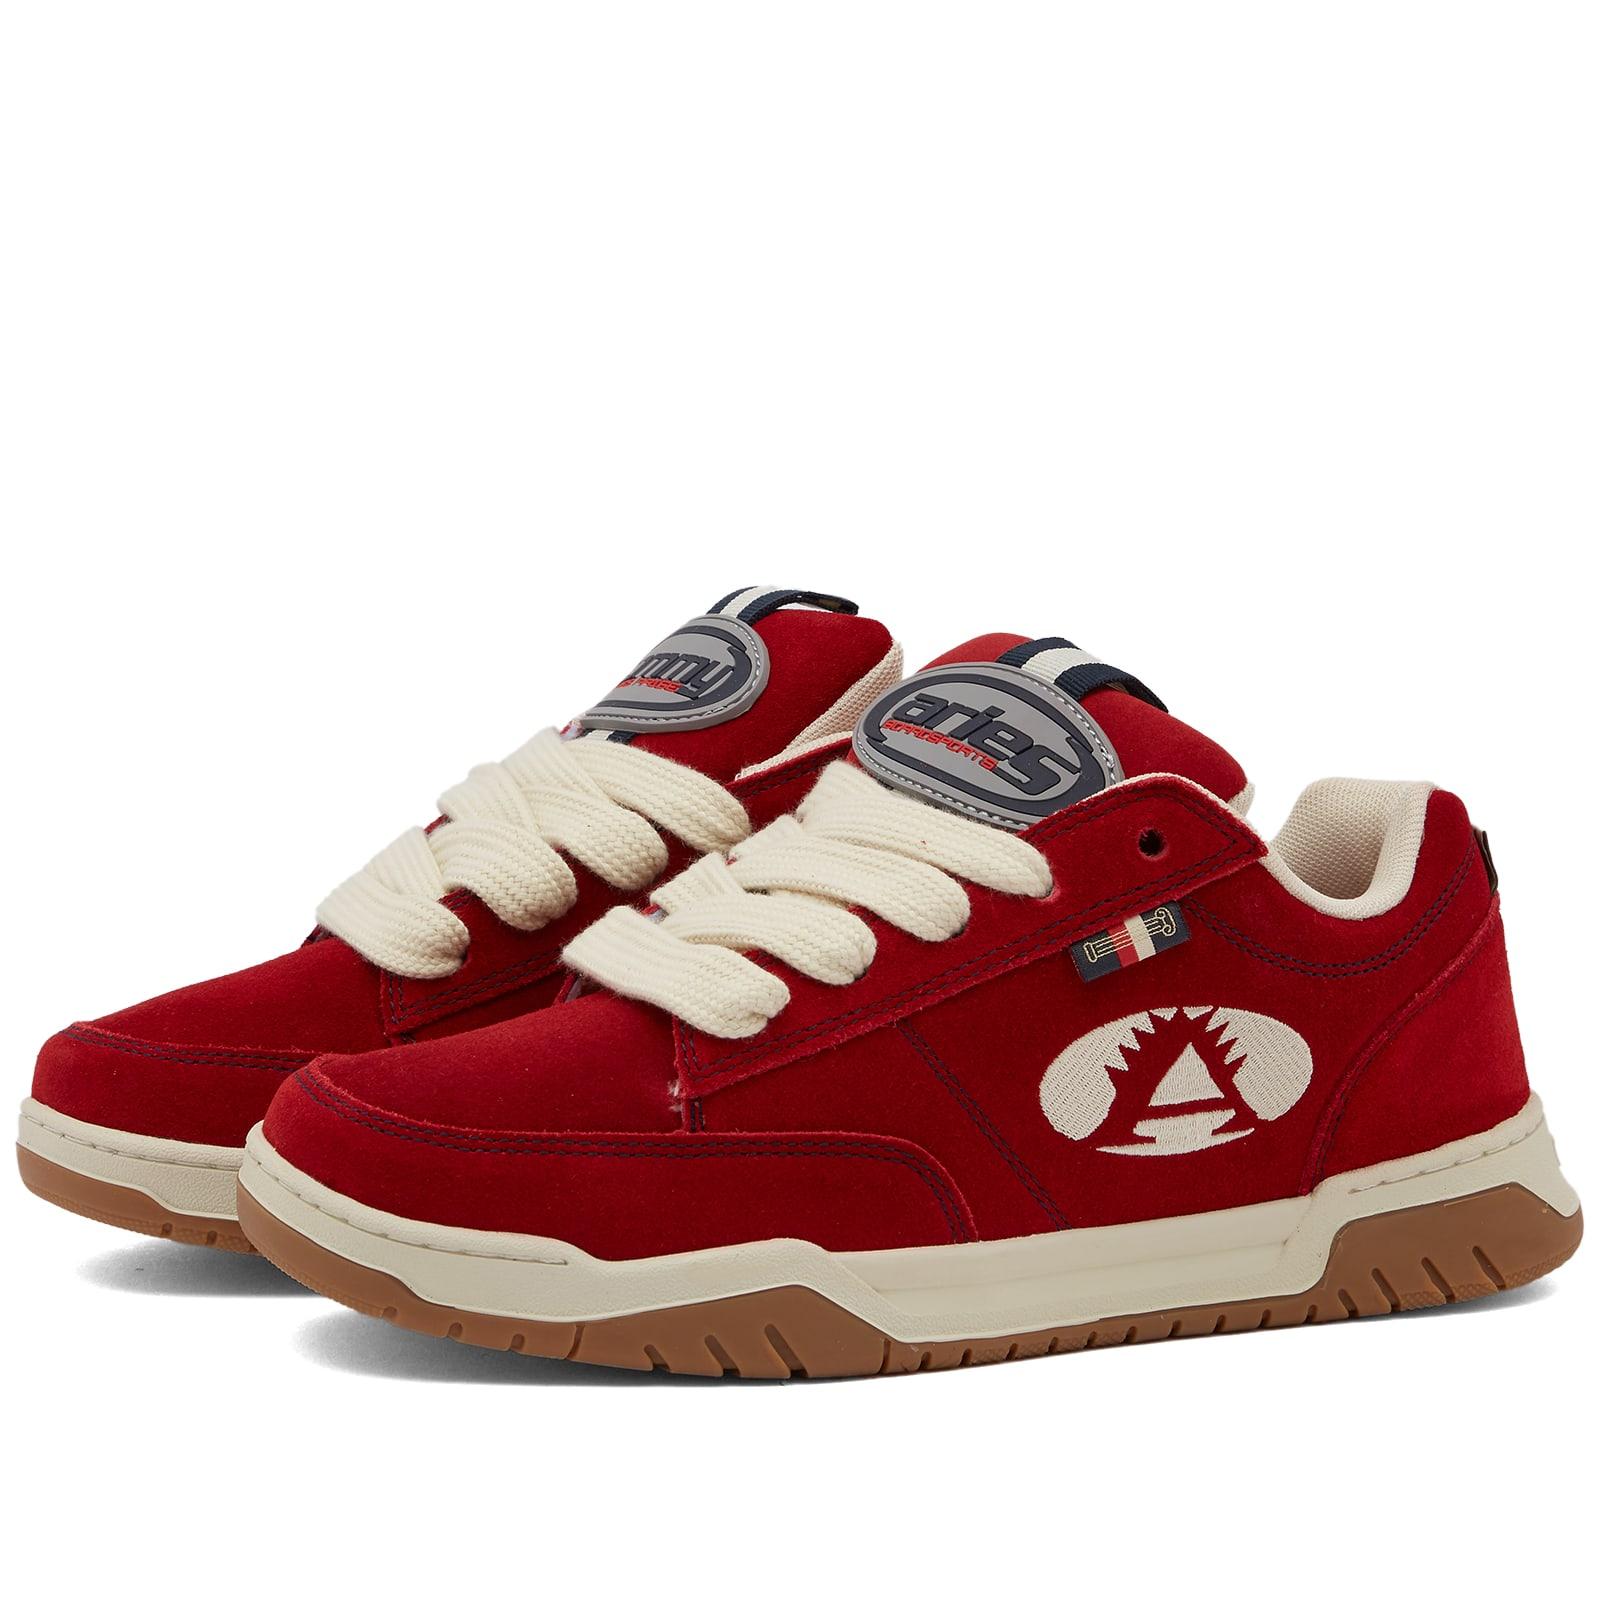 Tommy Hilfiger X Aries Skater Sneakers in Red | Lyst